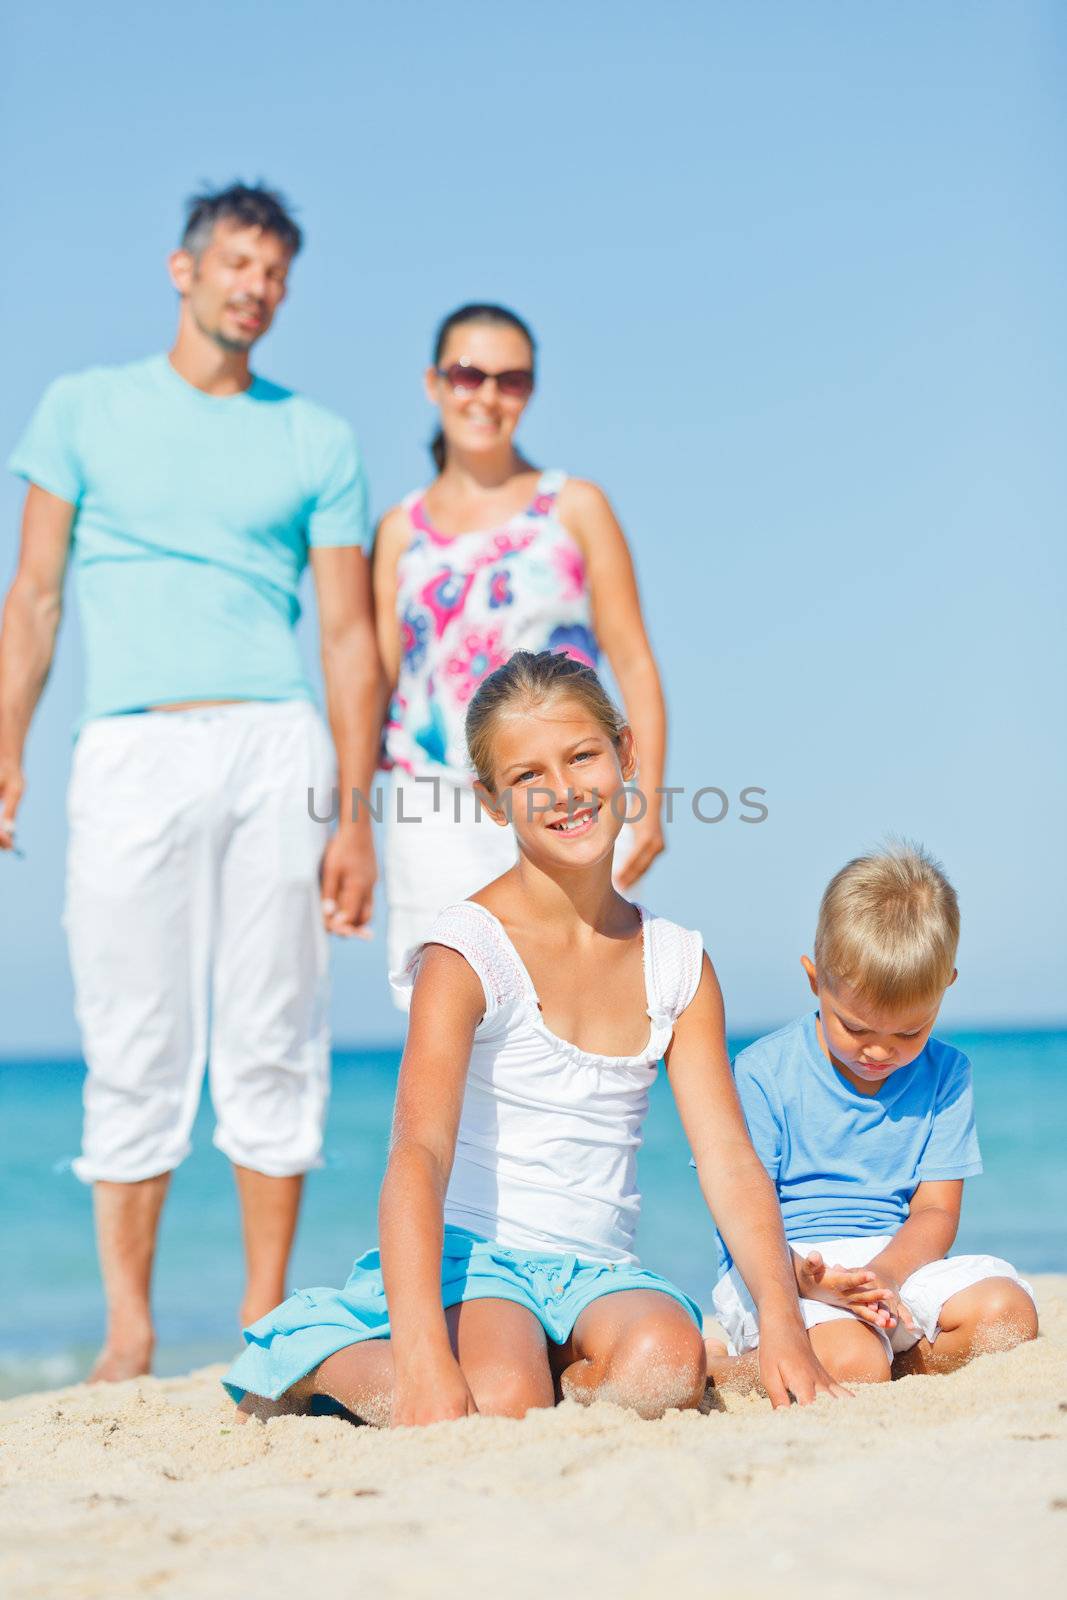 Two cute kids playing on tropical beach with their parents. Vertical view